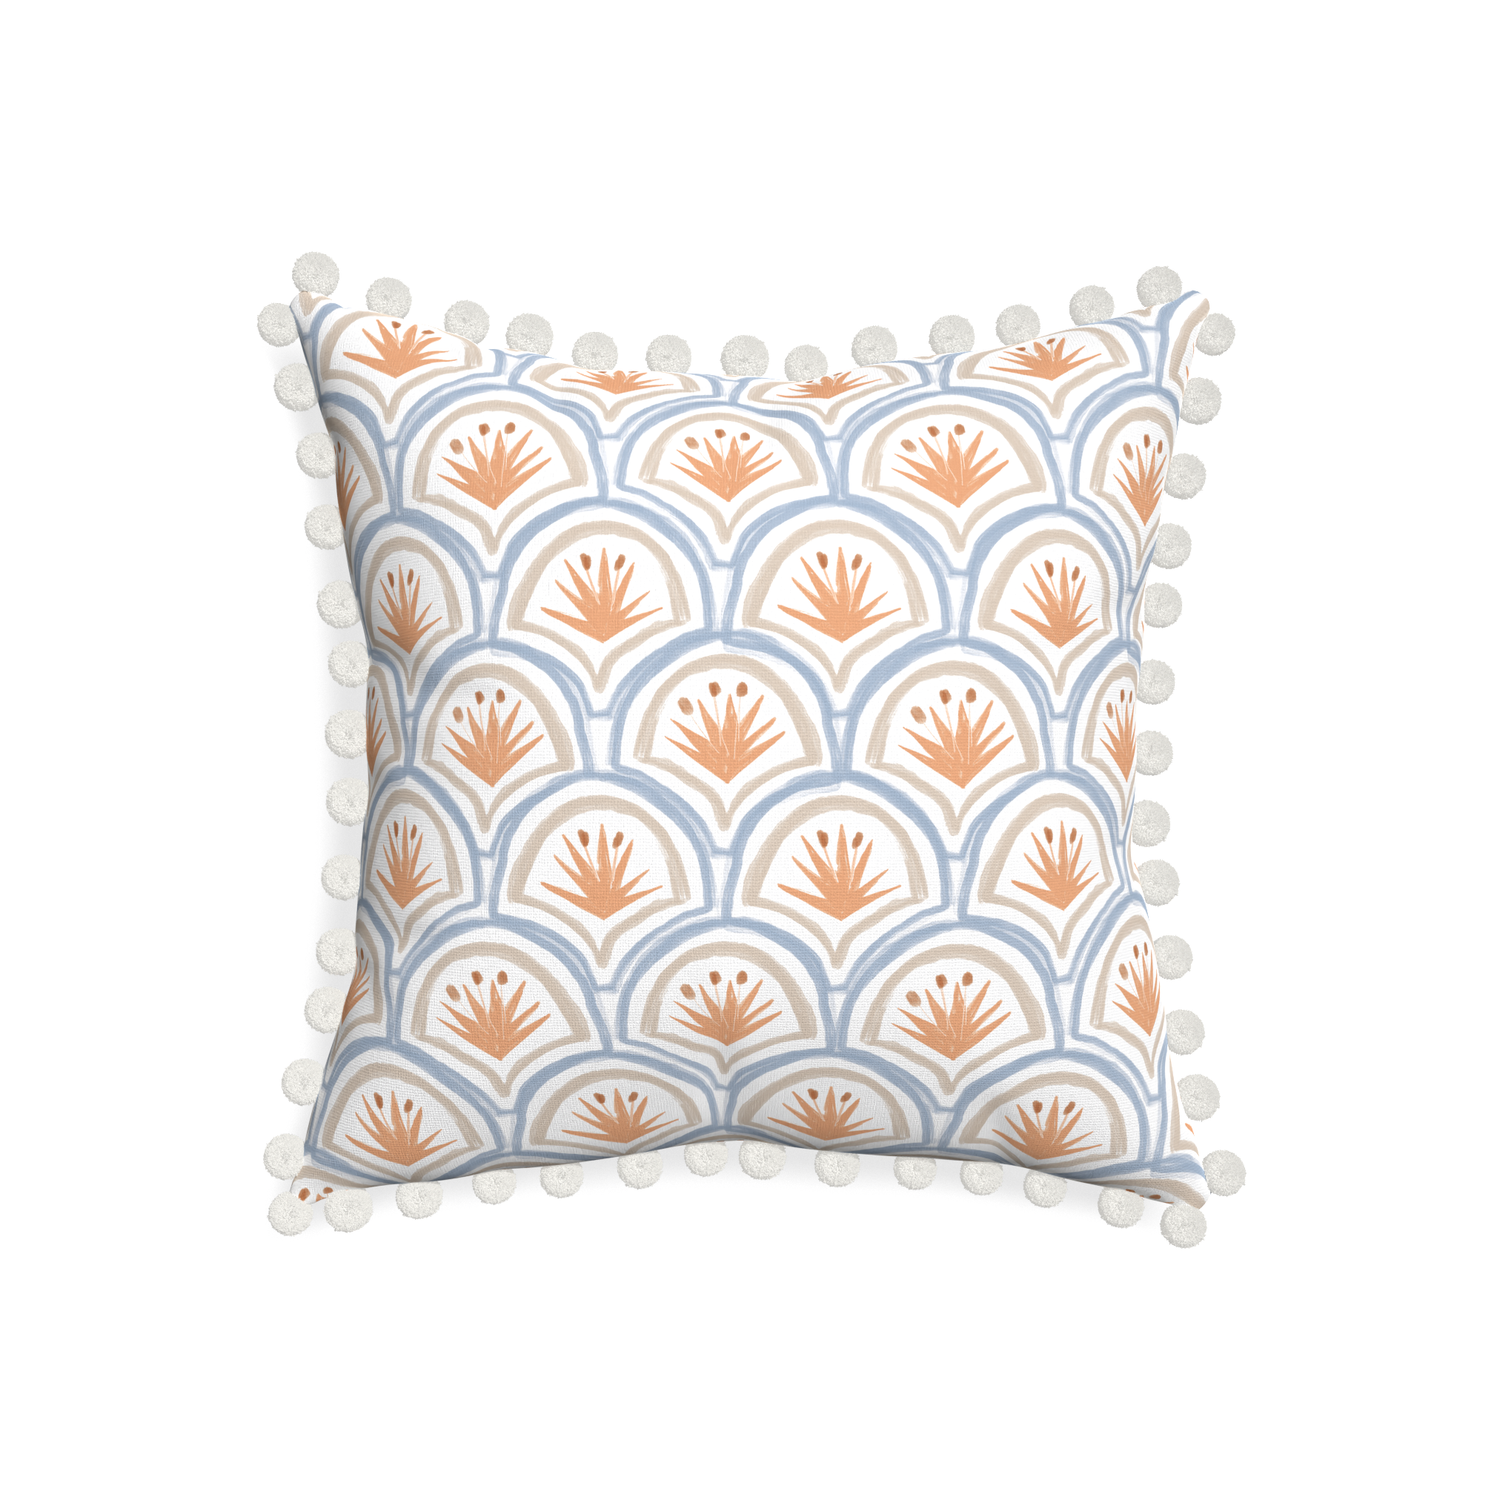 20-square thatcher apricot custom art deco palm patternpillow with snow pom pom on white background